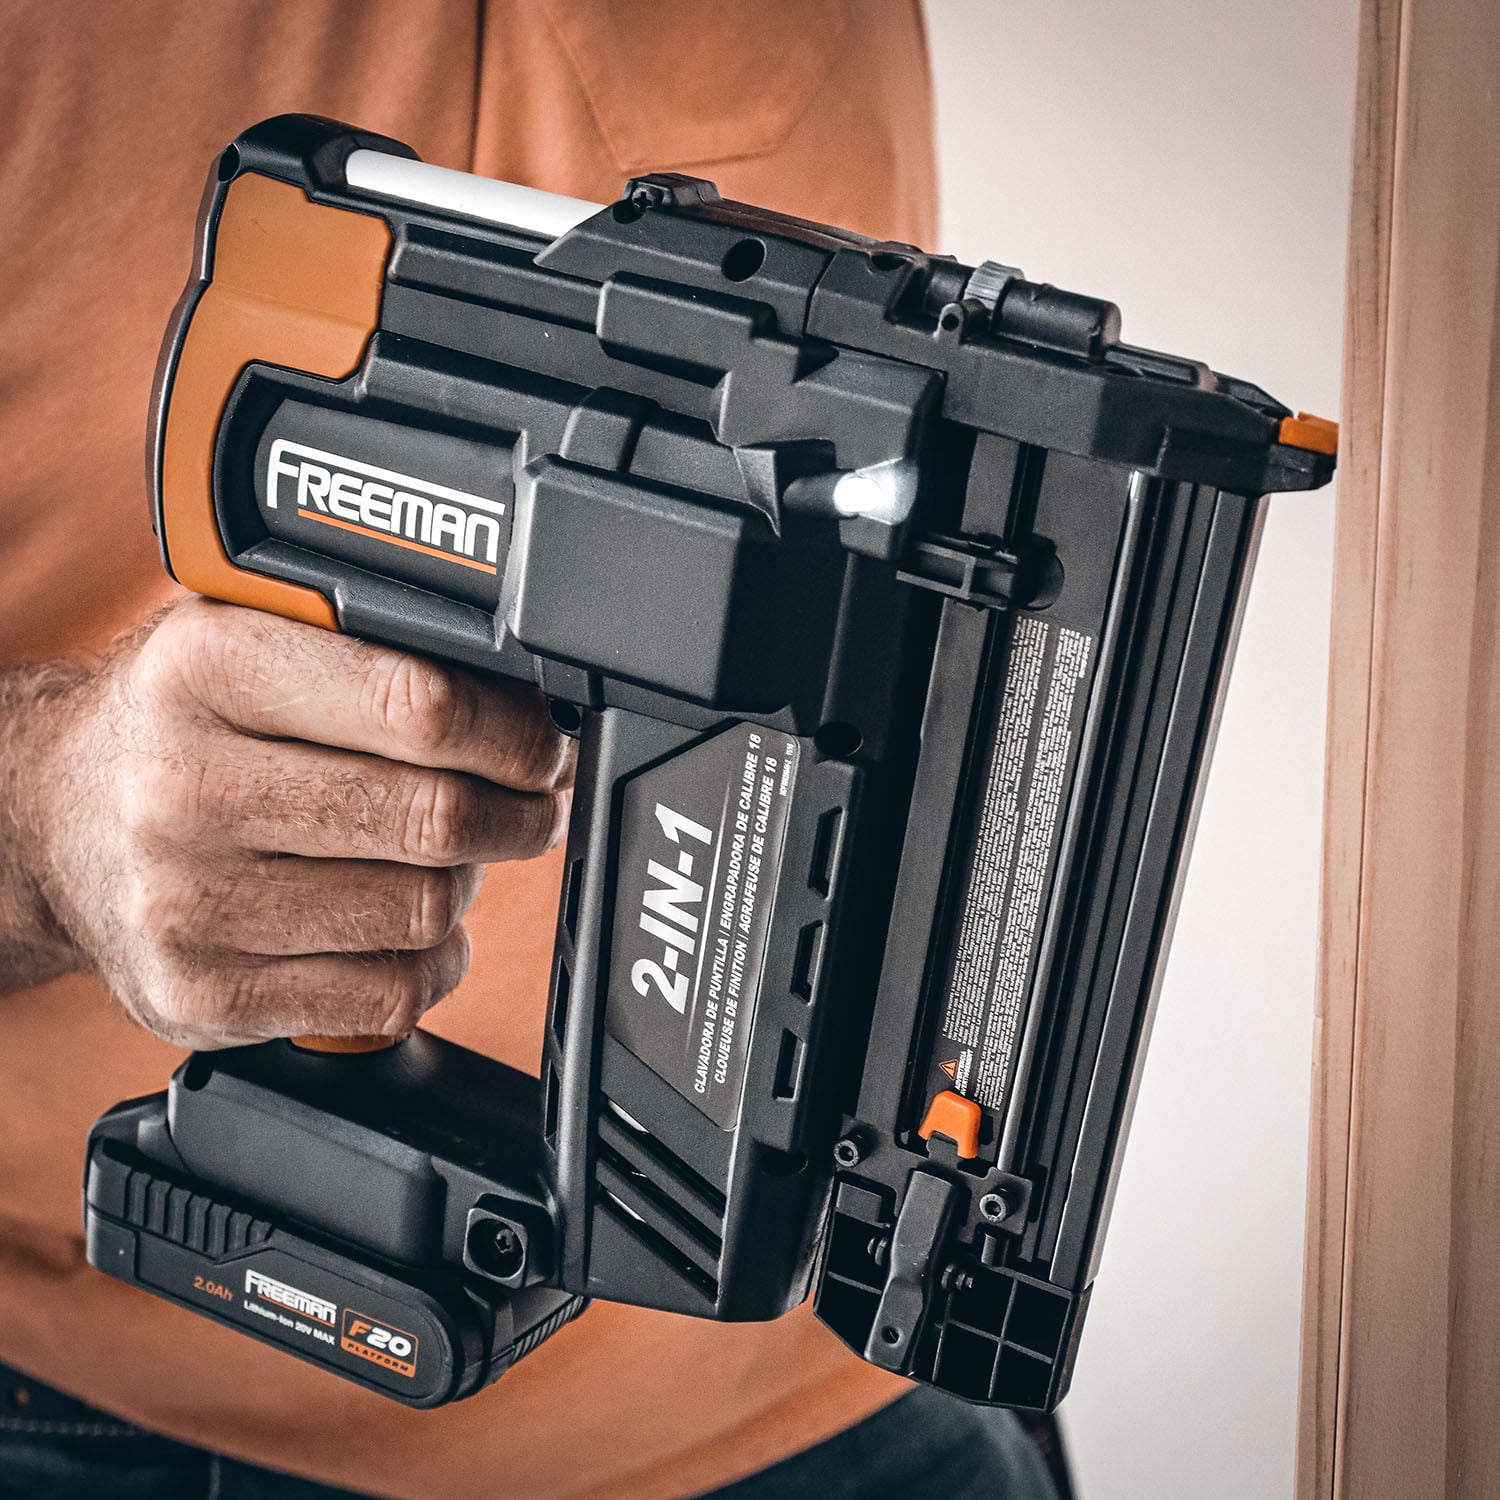 Excel 18V Cordless Second Fix Nail Gun (Tool Review) - YouTube